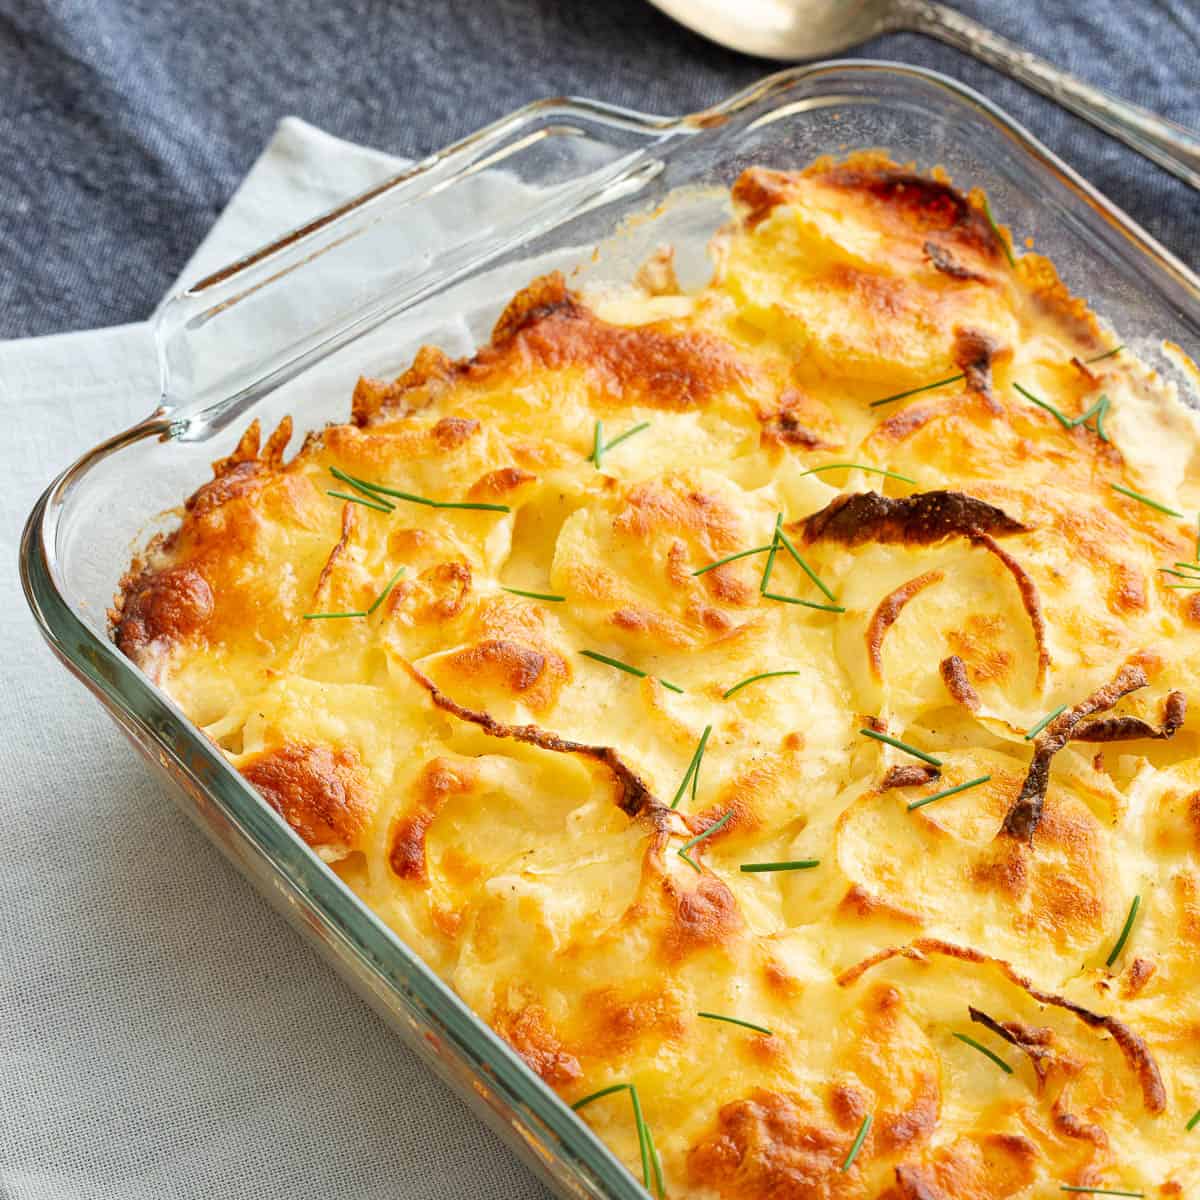 Large glass dish with golden baked potato bake.